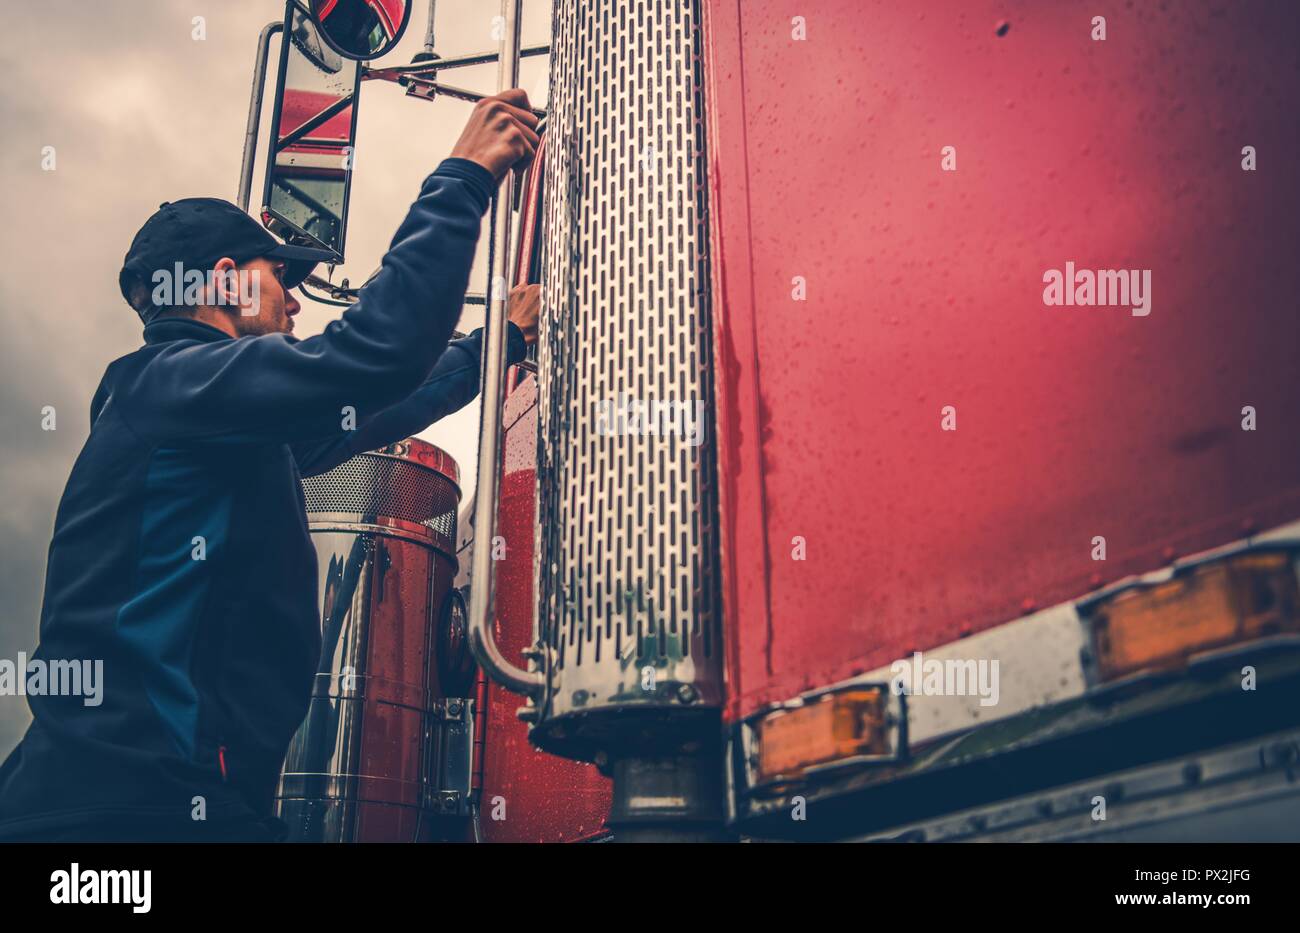 Transportation Industry Theme. Truck Driver Getting Into Truck Time To Hit the Road with Heavy Load. Stock Photo